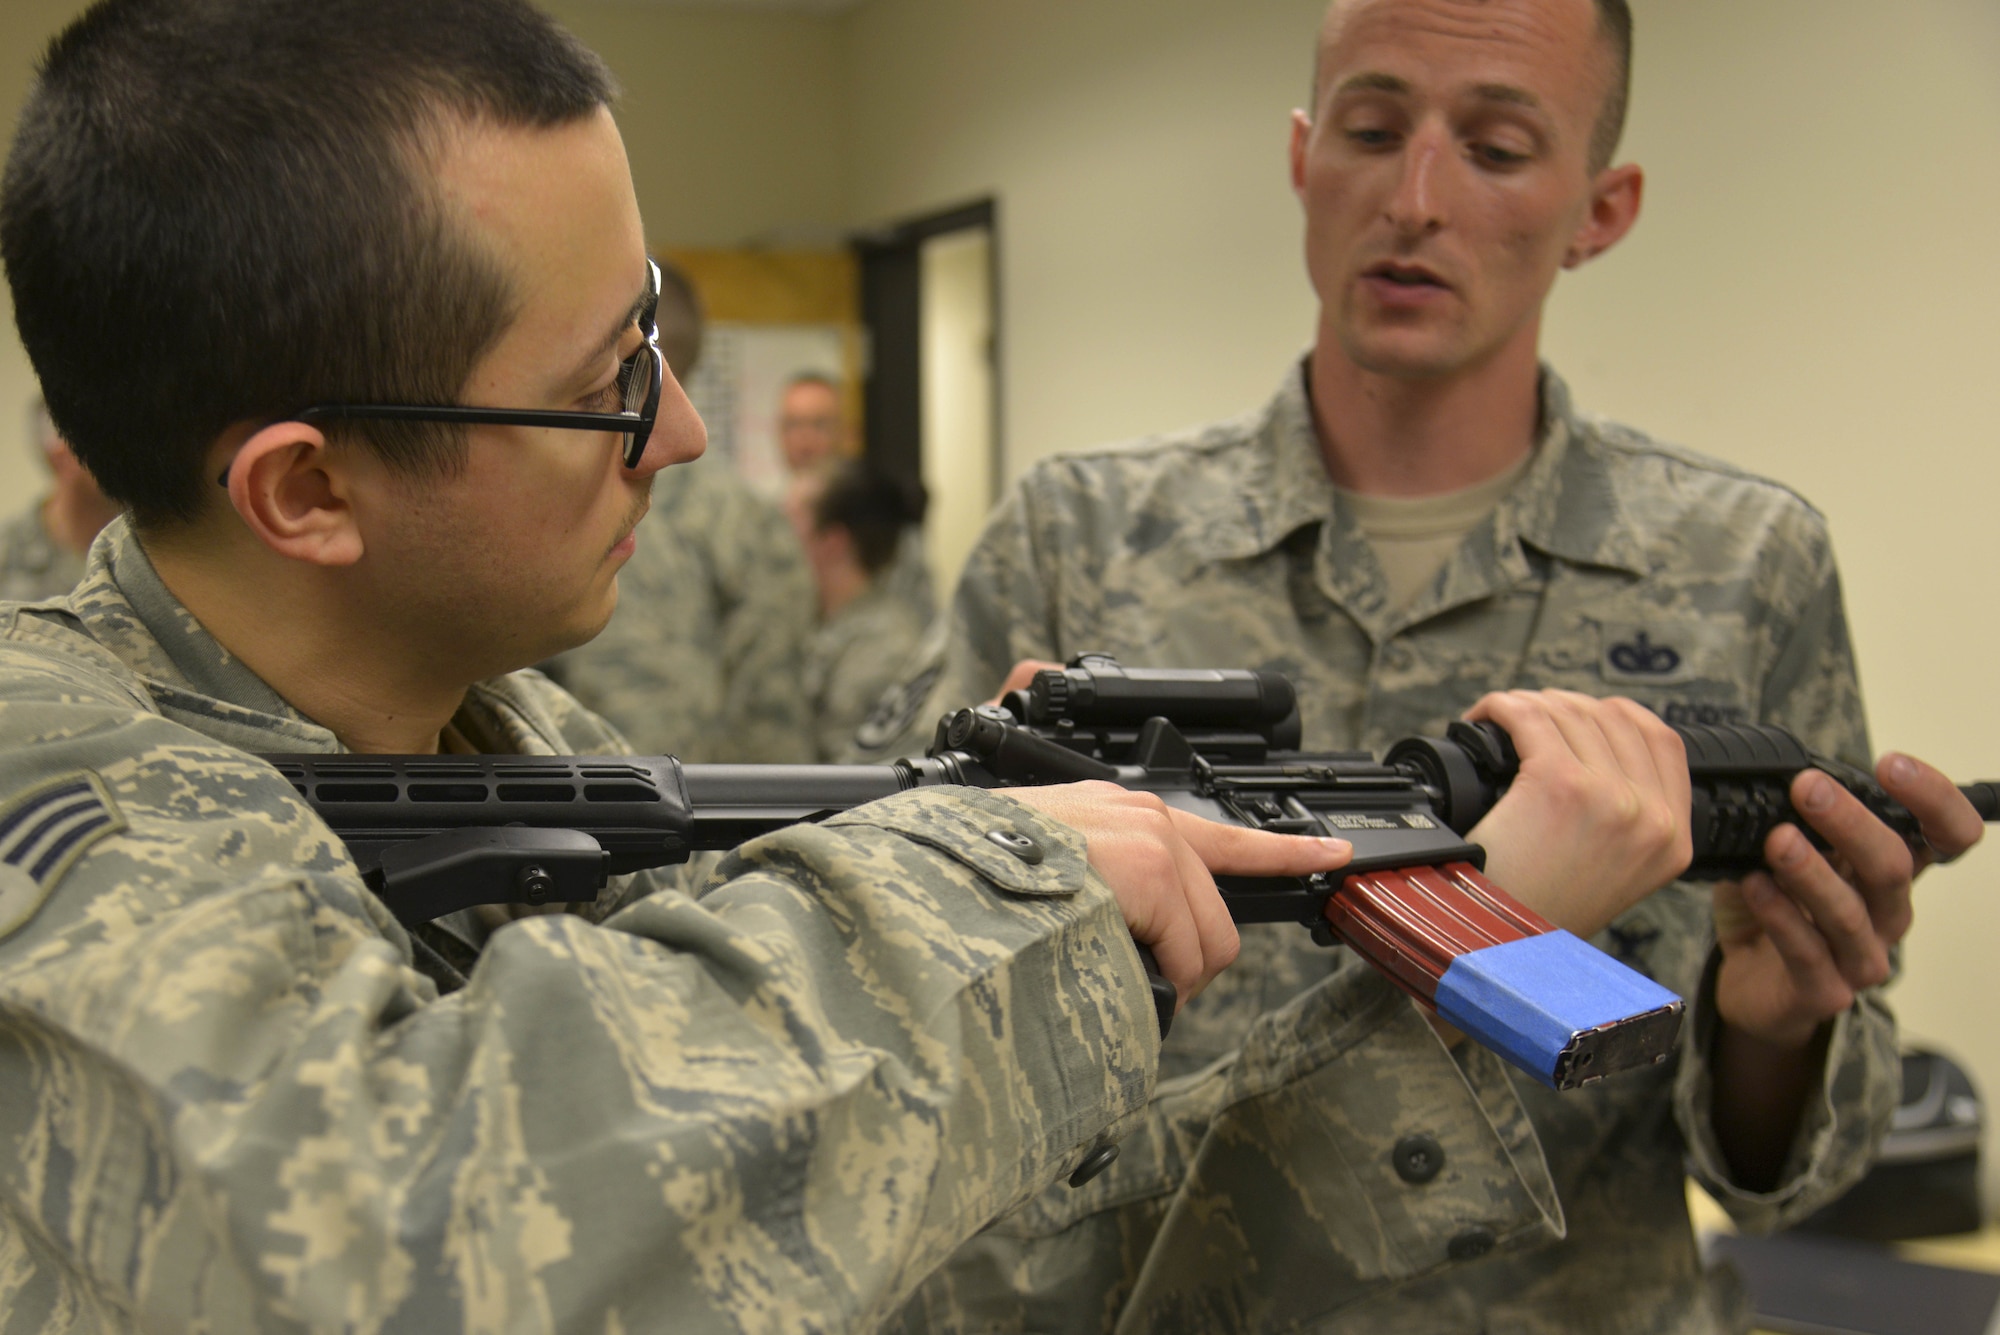 Staff Sgt. Troy Tulleners, 92nd Security Forces Squadron combat arms instructor, teaches Senior Airman Robert Curtis, 92nd Communications Squadron cyber transport technician, procedures on how to clear an M4 Carbine Assault Rifle during Operation M4 April 6, 2015, at Fairchild Air Force Base, Wash. Chief Master Sgt. Christian Pugh, 92nd Air Refueling Wing command chief, went around the communications squadron building testing Airmen's knowledge on how to use the weapon. (U.S. Air Force photo/Senior Airman Janelle Patiño)